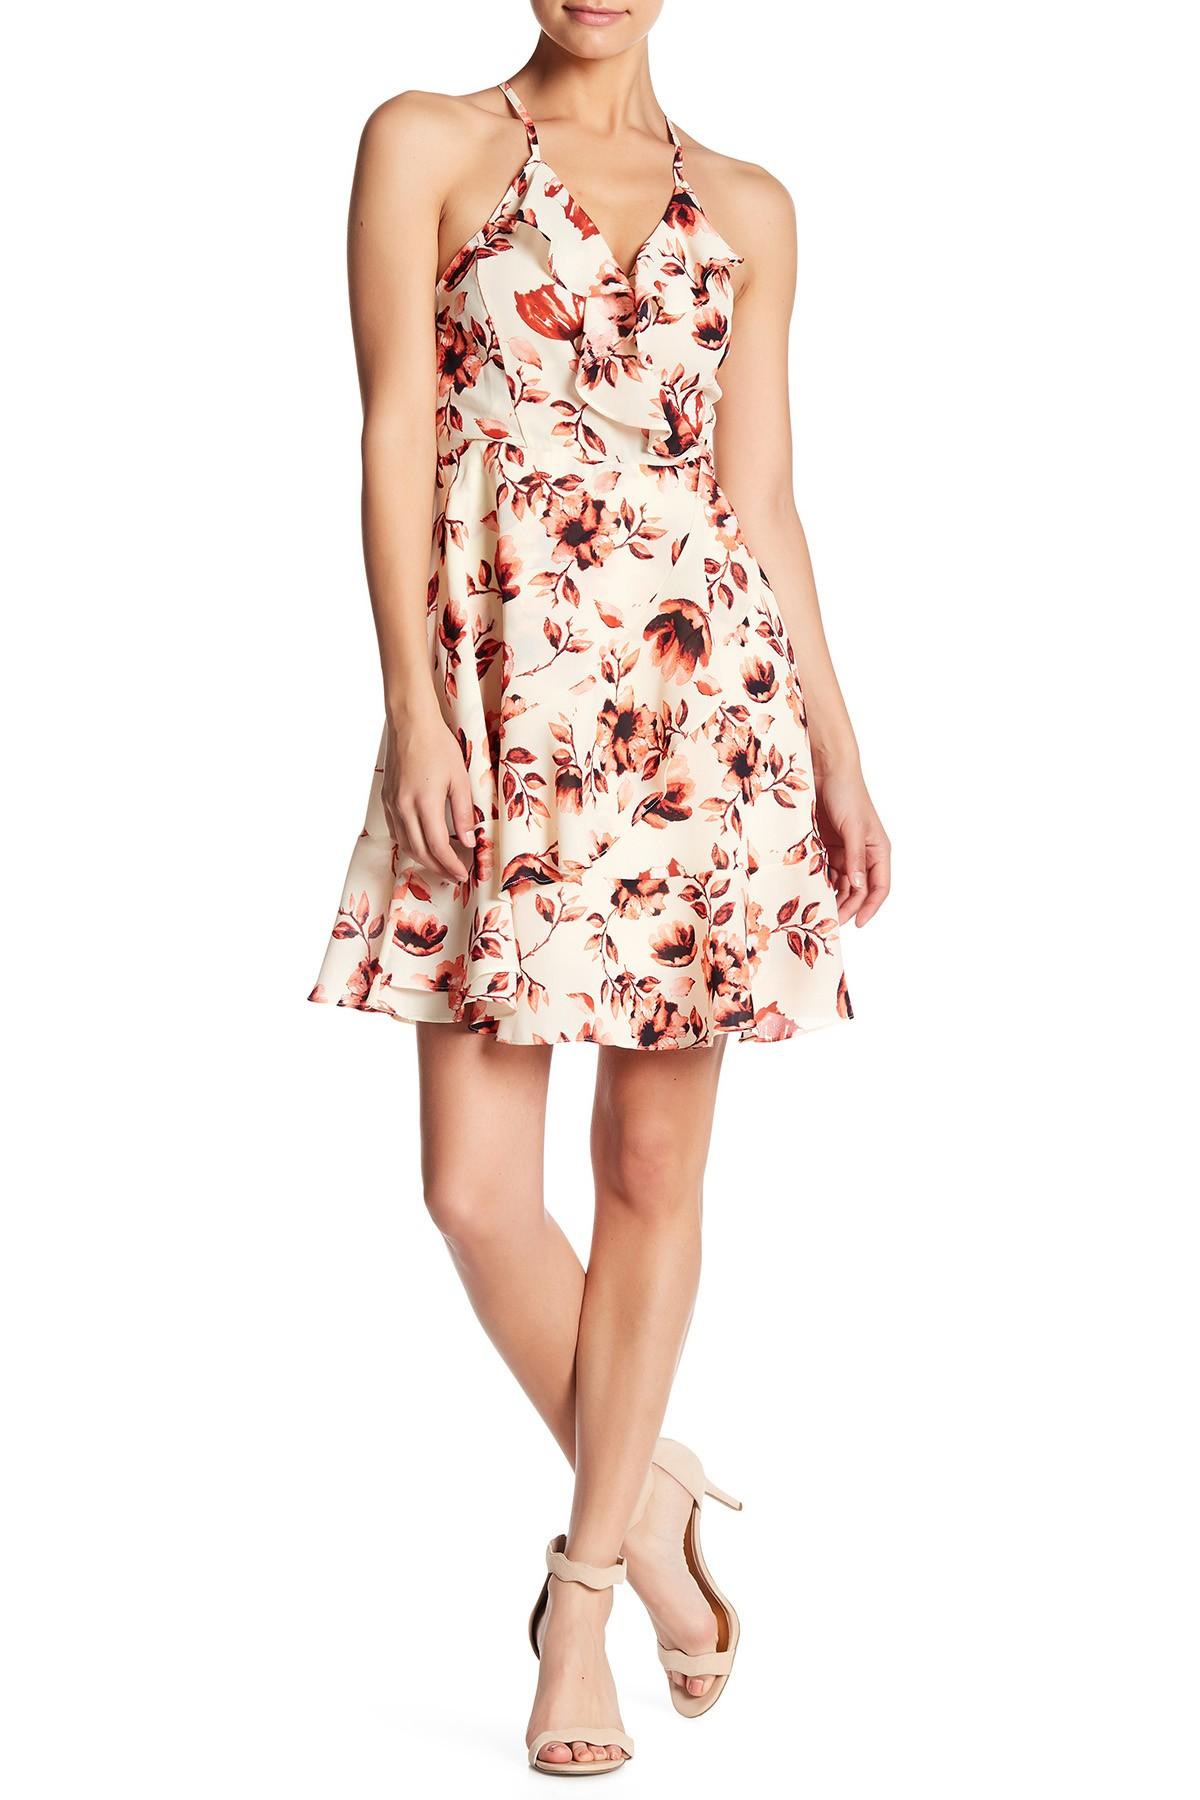 Lyst - Romeo and juliet couture Floral Print Ruffle Dress in Pink